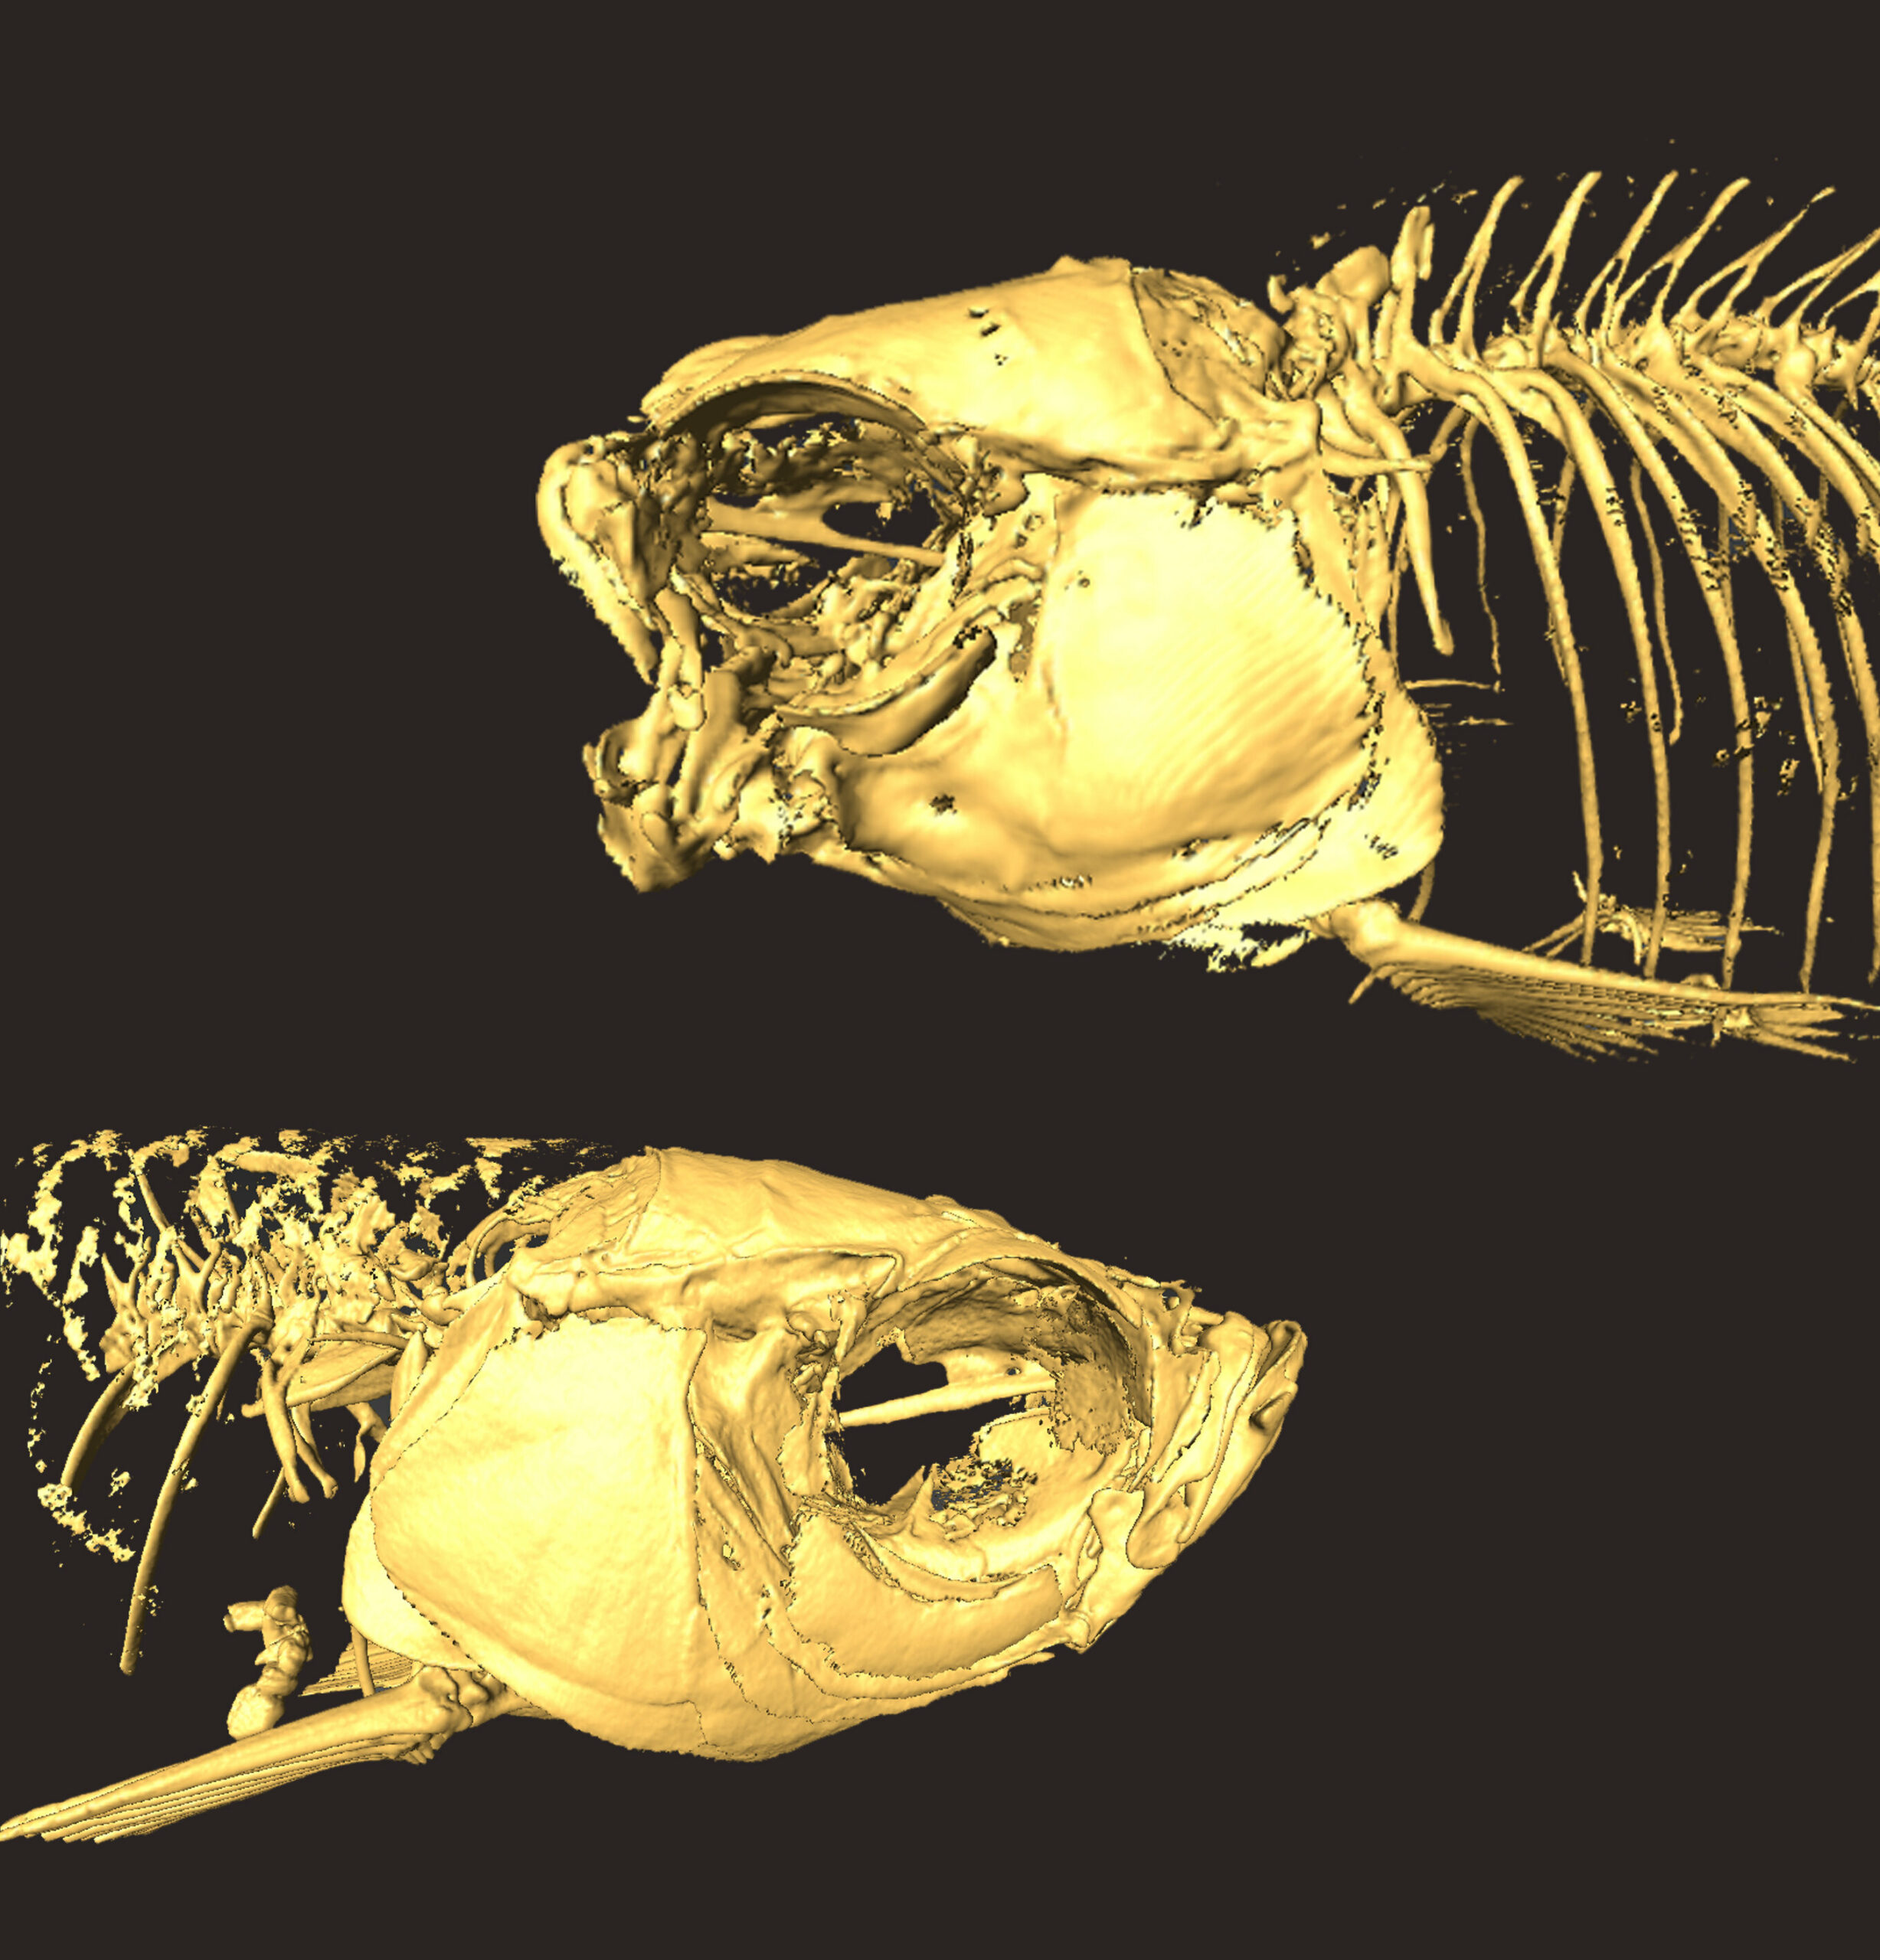 Modern-day mutant fishes replicate creatures of ancient oceans